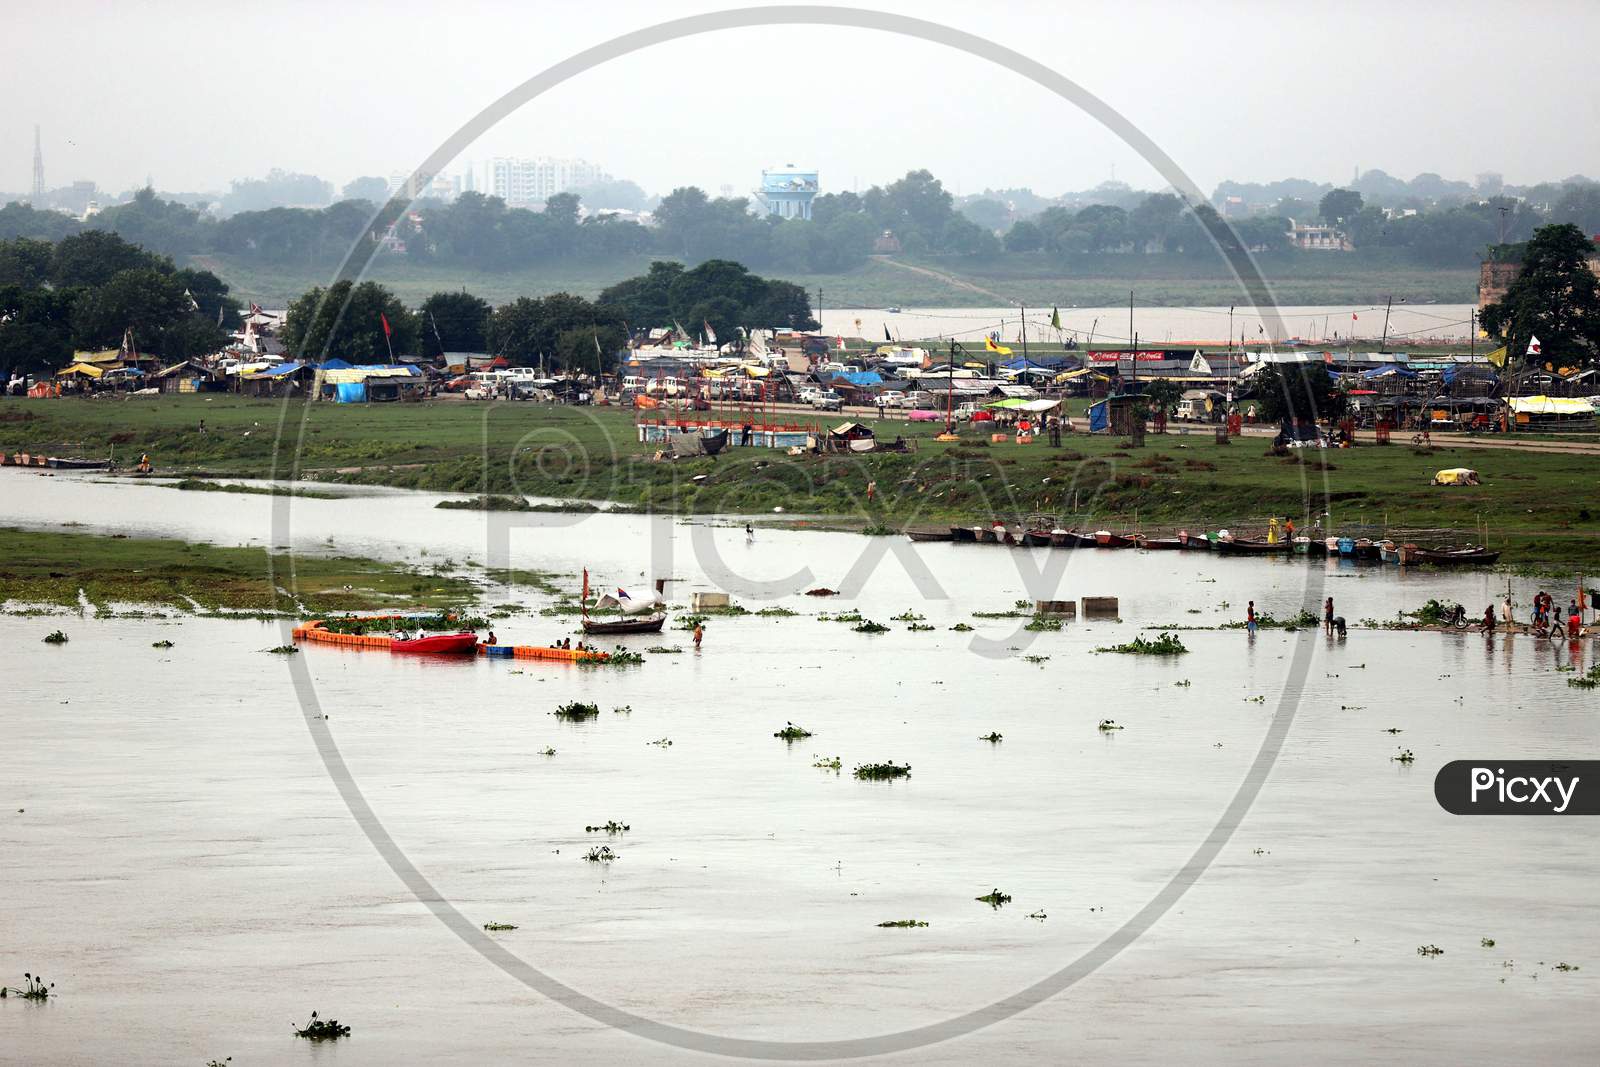 A View Of Ghats Submerged In The Flooded Water Of River Ganga And Yamuna During Heavy Rain In Prayagraj, August 23, 2020